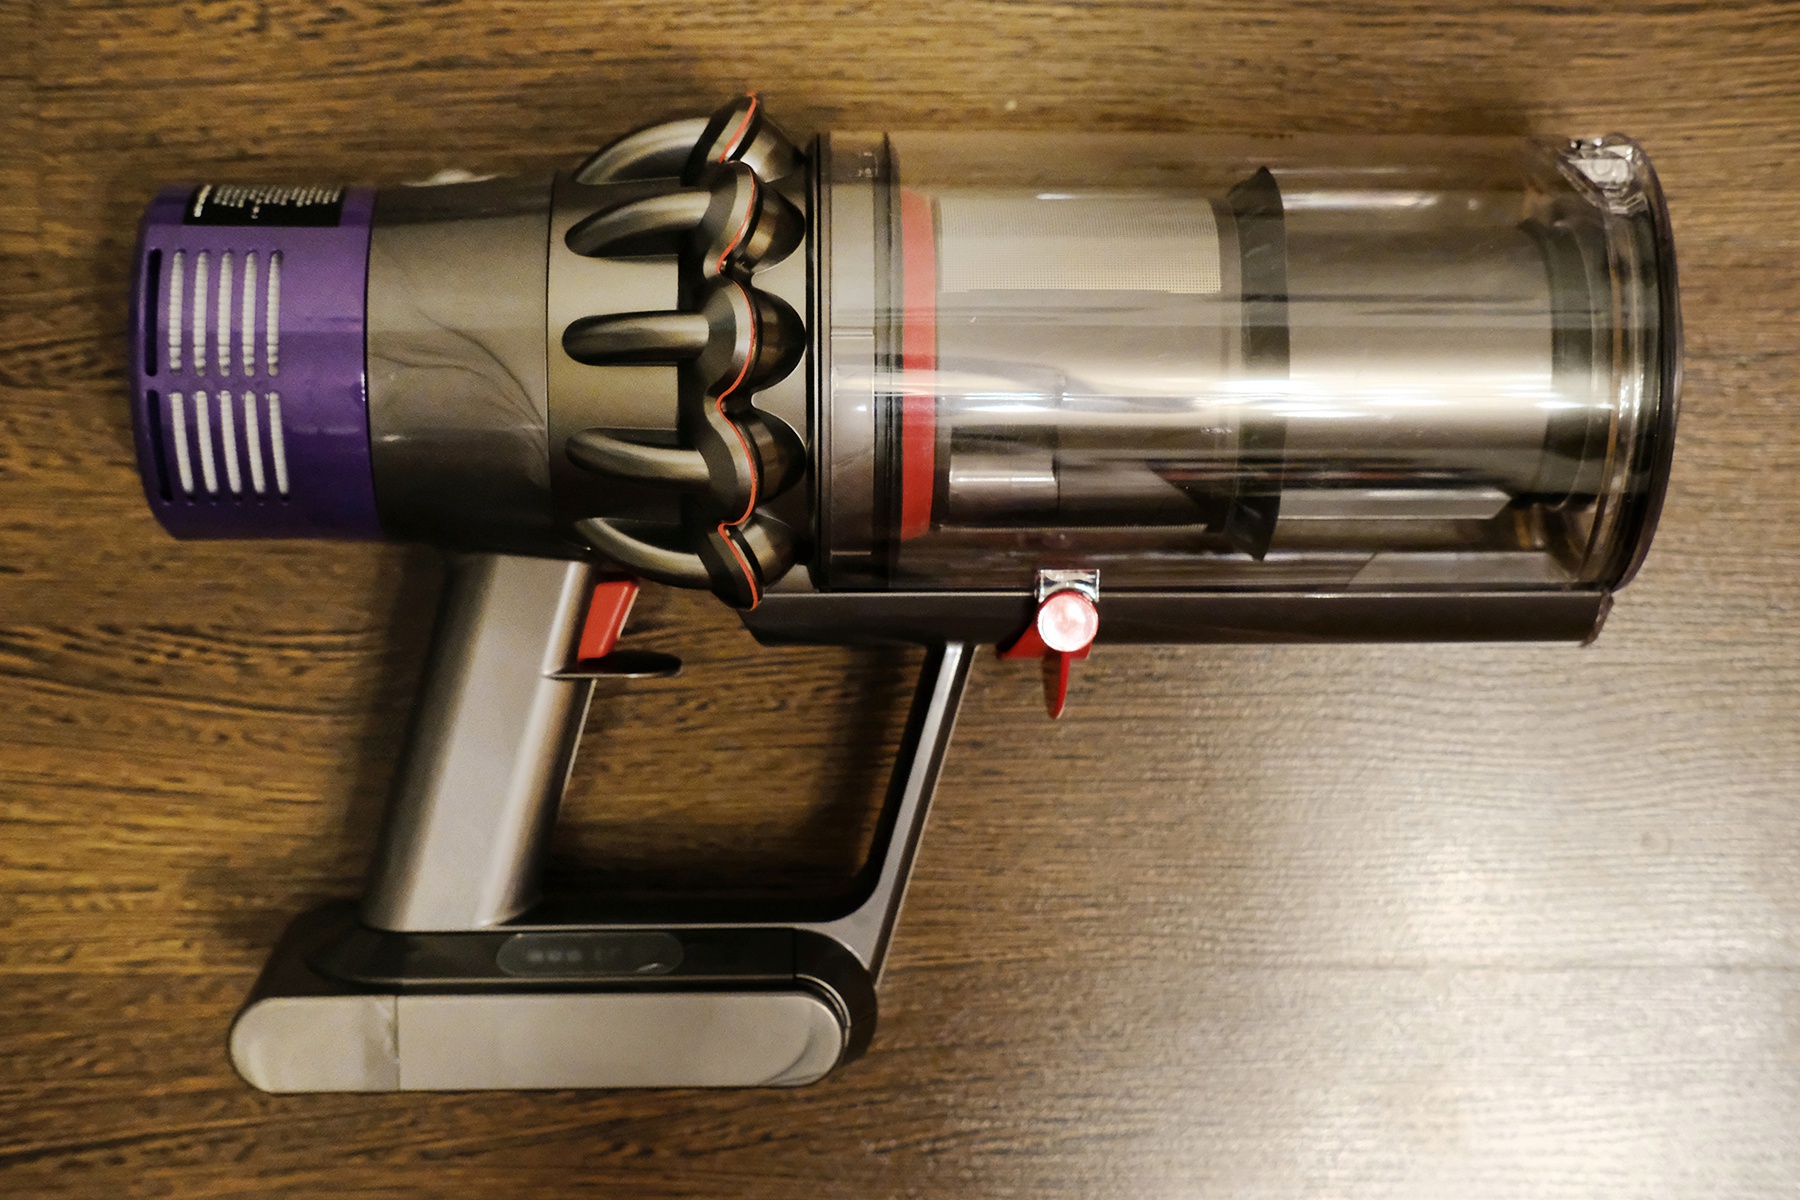 Absolute 10. Dyson v10 absolute. Dyson Cyclone v10 absolute. Dyson v12 Cyclone. Dyson 10 absolute.